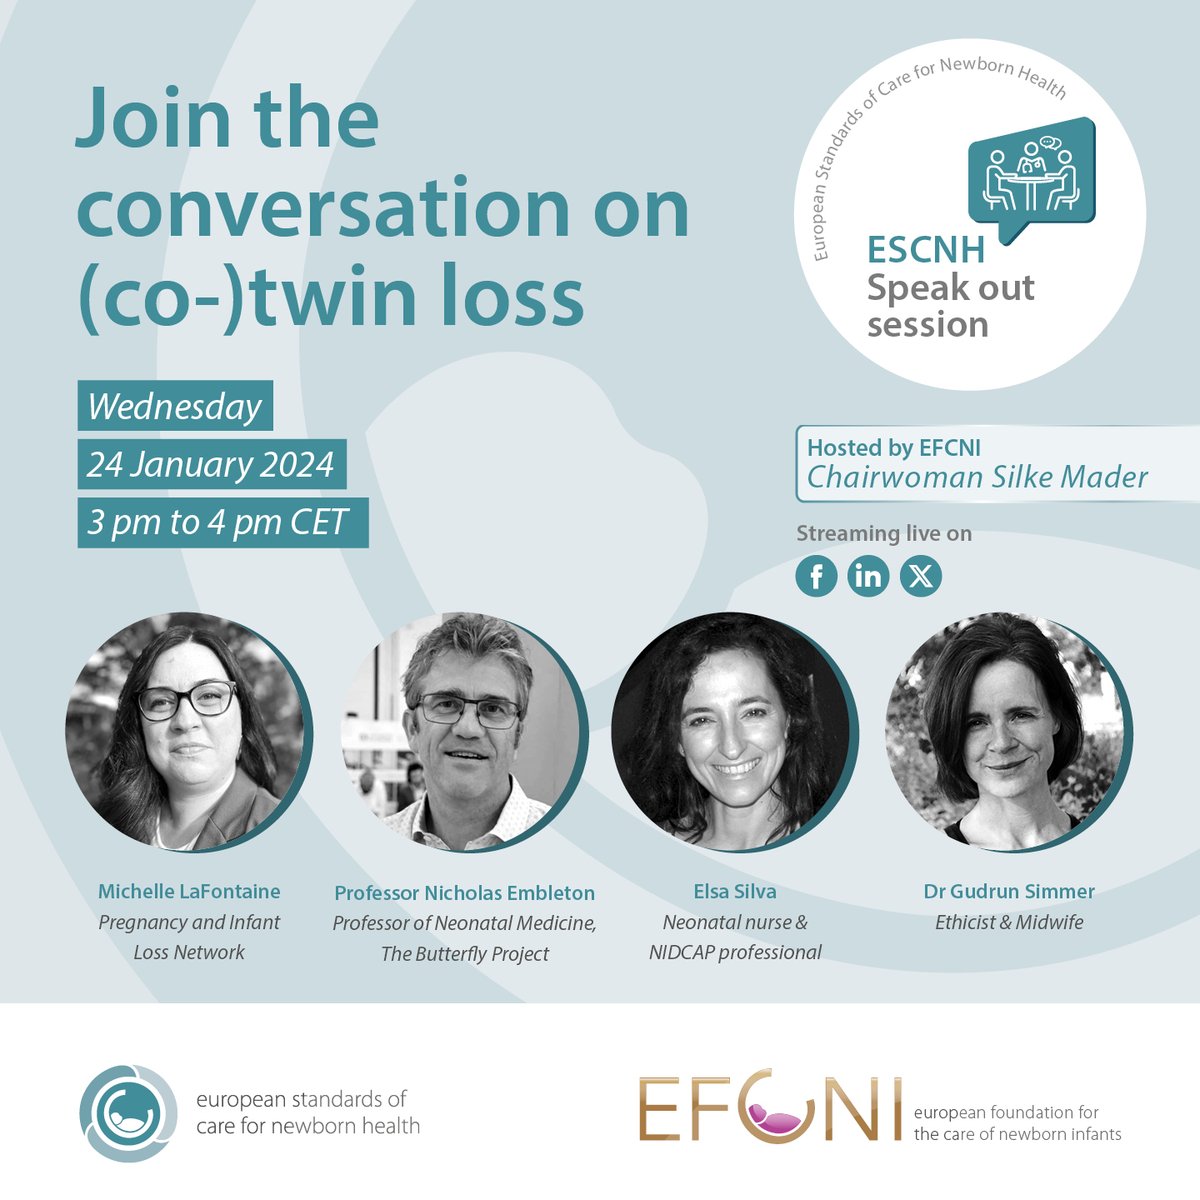 📅Save the date! Our “Speak out session” on (co-)twin loss is happening on 24 Jan 2024, 3-4 pm CET, under the umbrella of #ESCNH. Tune in to hear from experts & affected families. Let’s raise awareness & provide support. Streaming live on X/Twitter. #TwinLoss @NeoResearch_Net